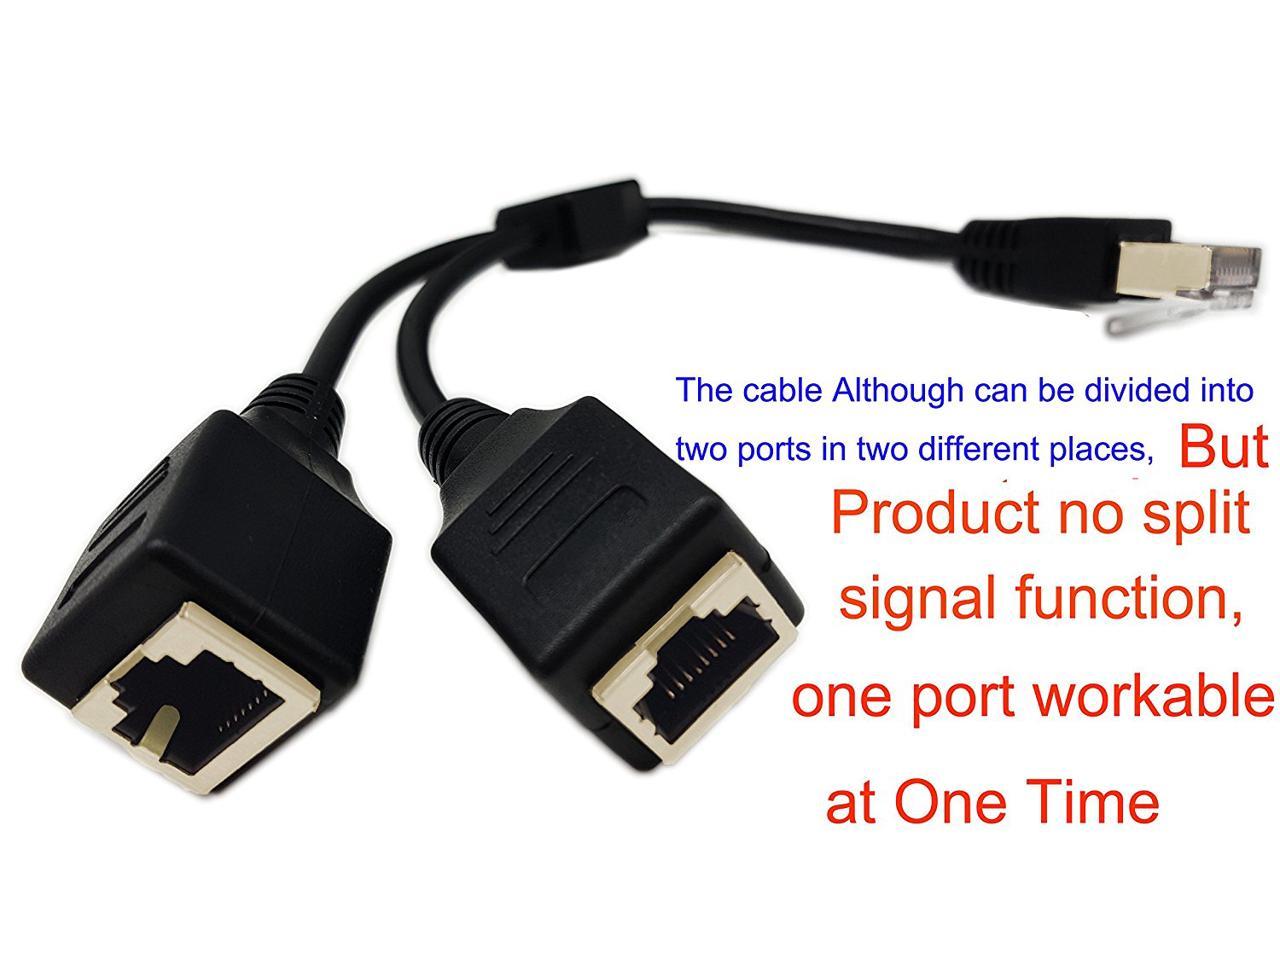 M/F SinLoon RJ45 Ethernet Adapter Cable,RJ45 Splitter Adapter Male to Famale Ethernet Switch Adapter Cable for CAT 5/CAT 6 LAN Ethernet Socket Connector Adapter Cat5 Cat6 Cable 